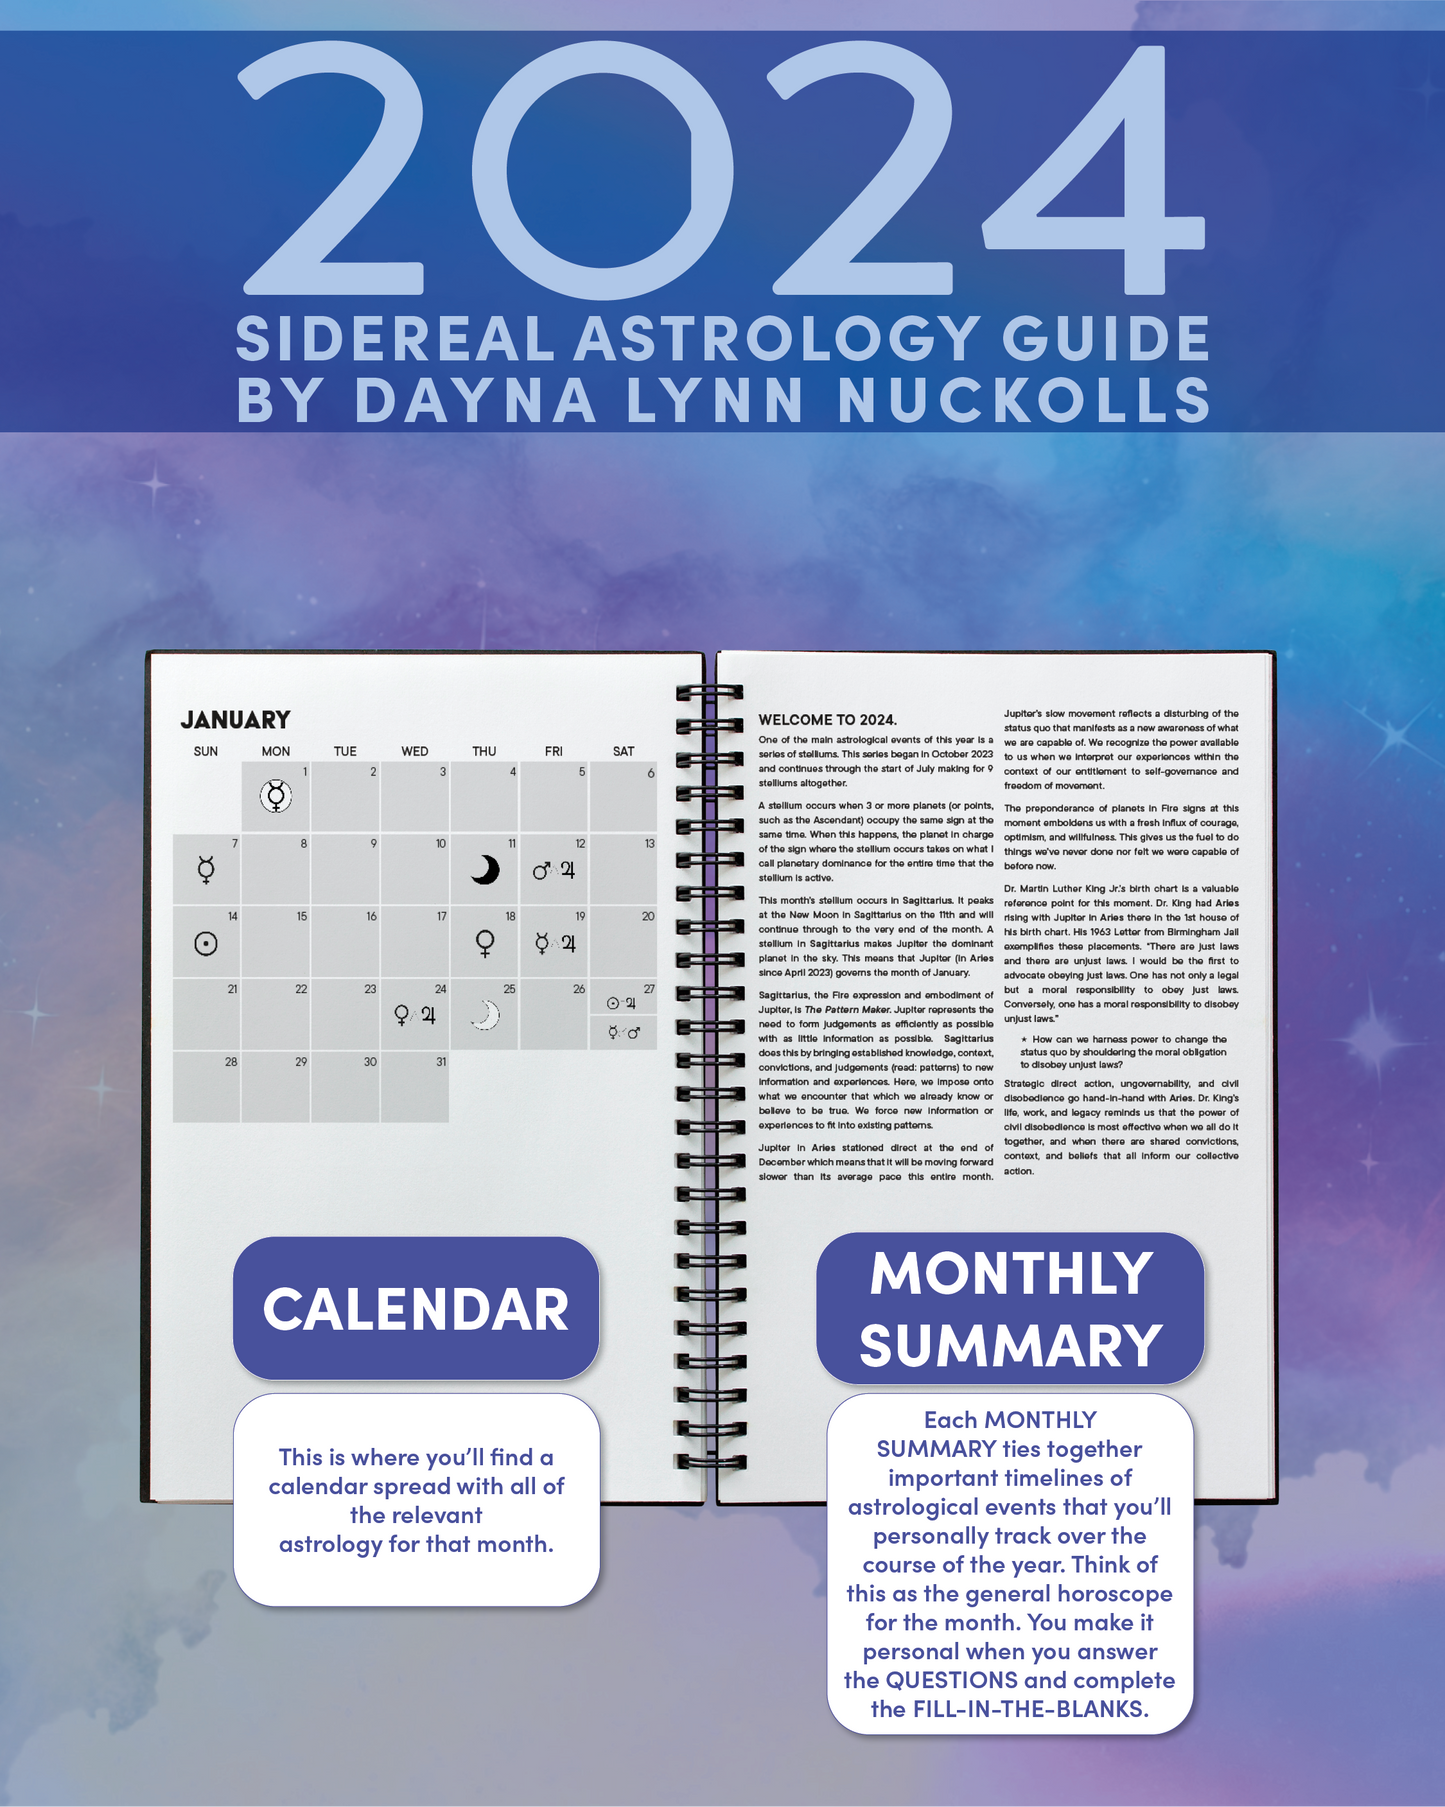 The 2024 Sidereal Astrology Guide is a sidereal calendar with 2024 monthly horoscopes, 2024 sidereal astrology monthly horoscopes for your sidereal sign.